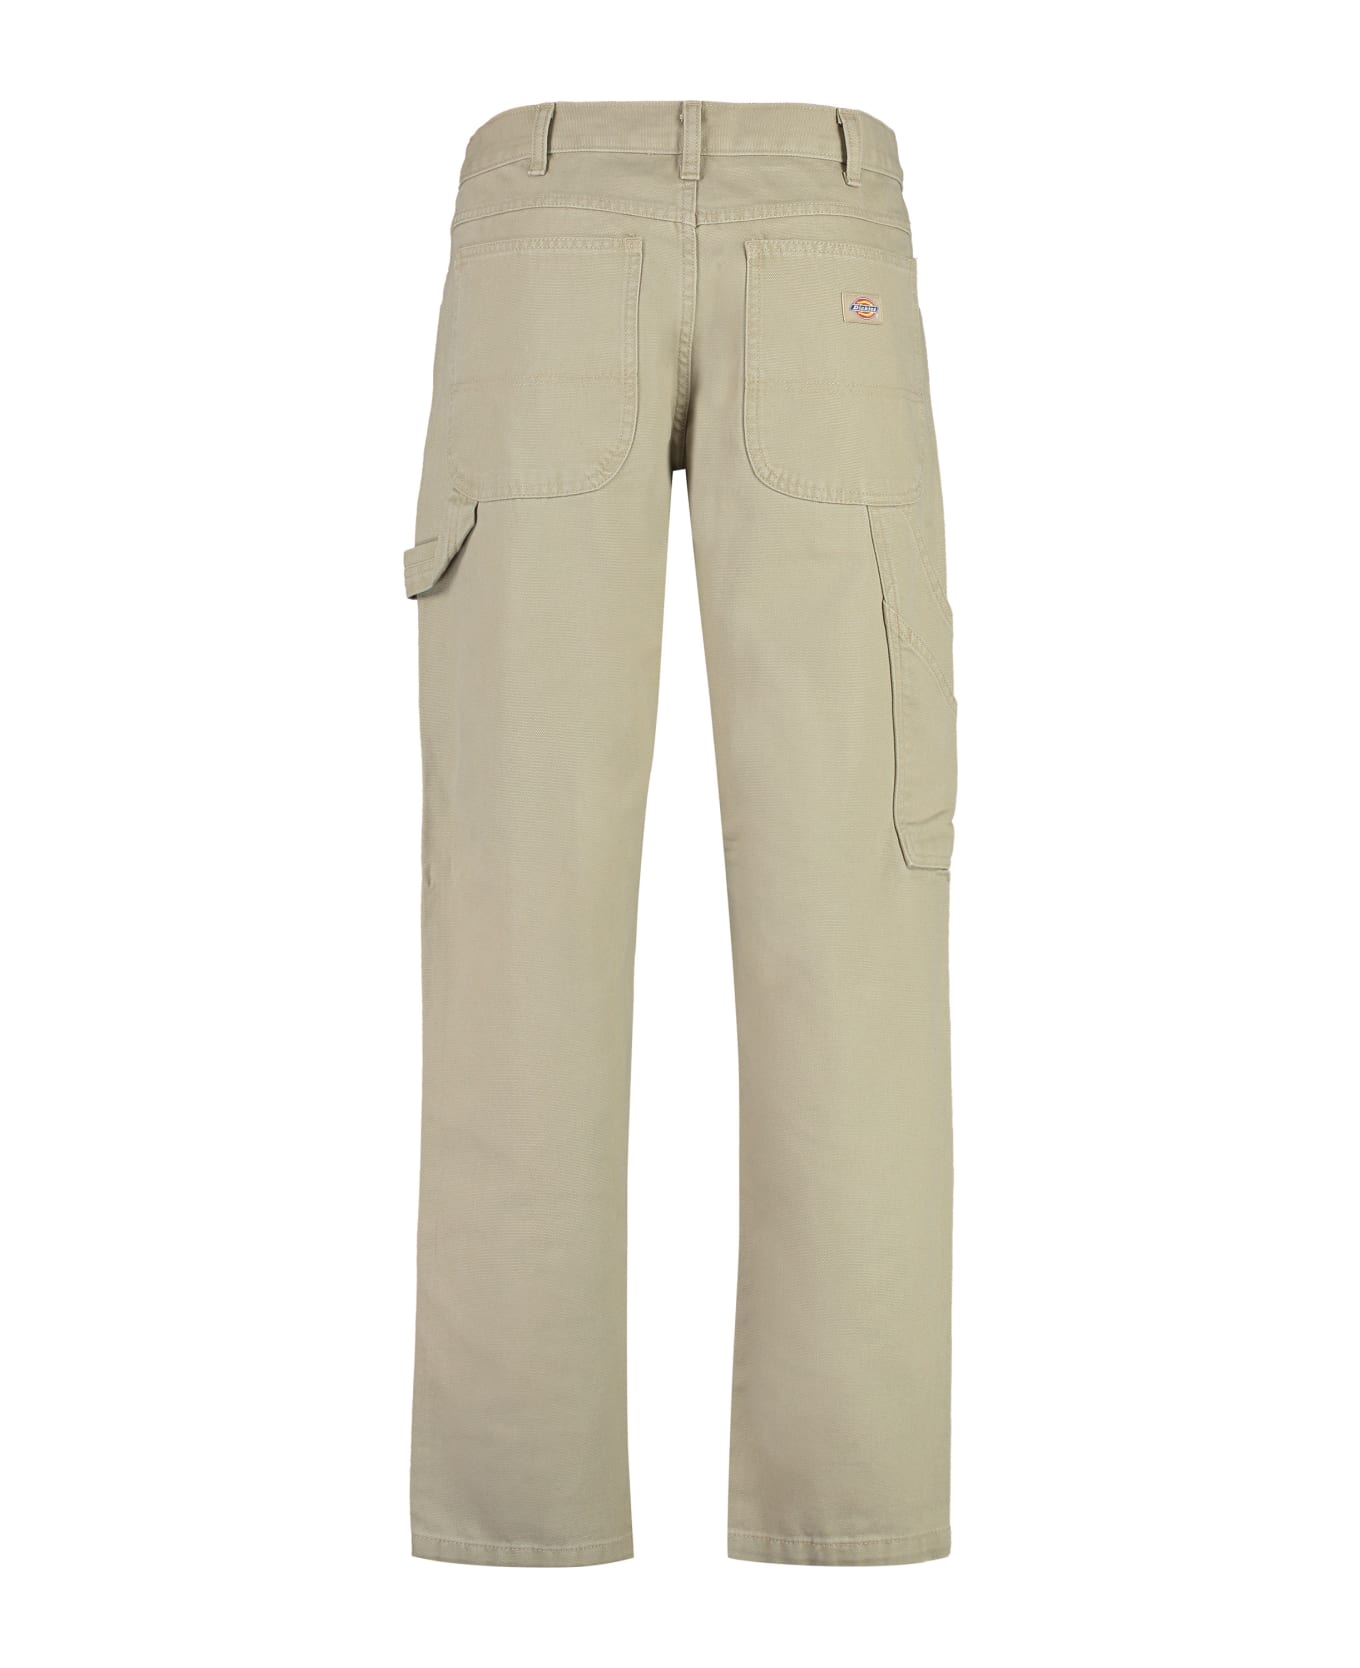 Dickies Dc Cotton Trousers - Beige ボトムス